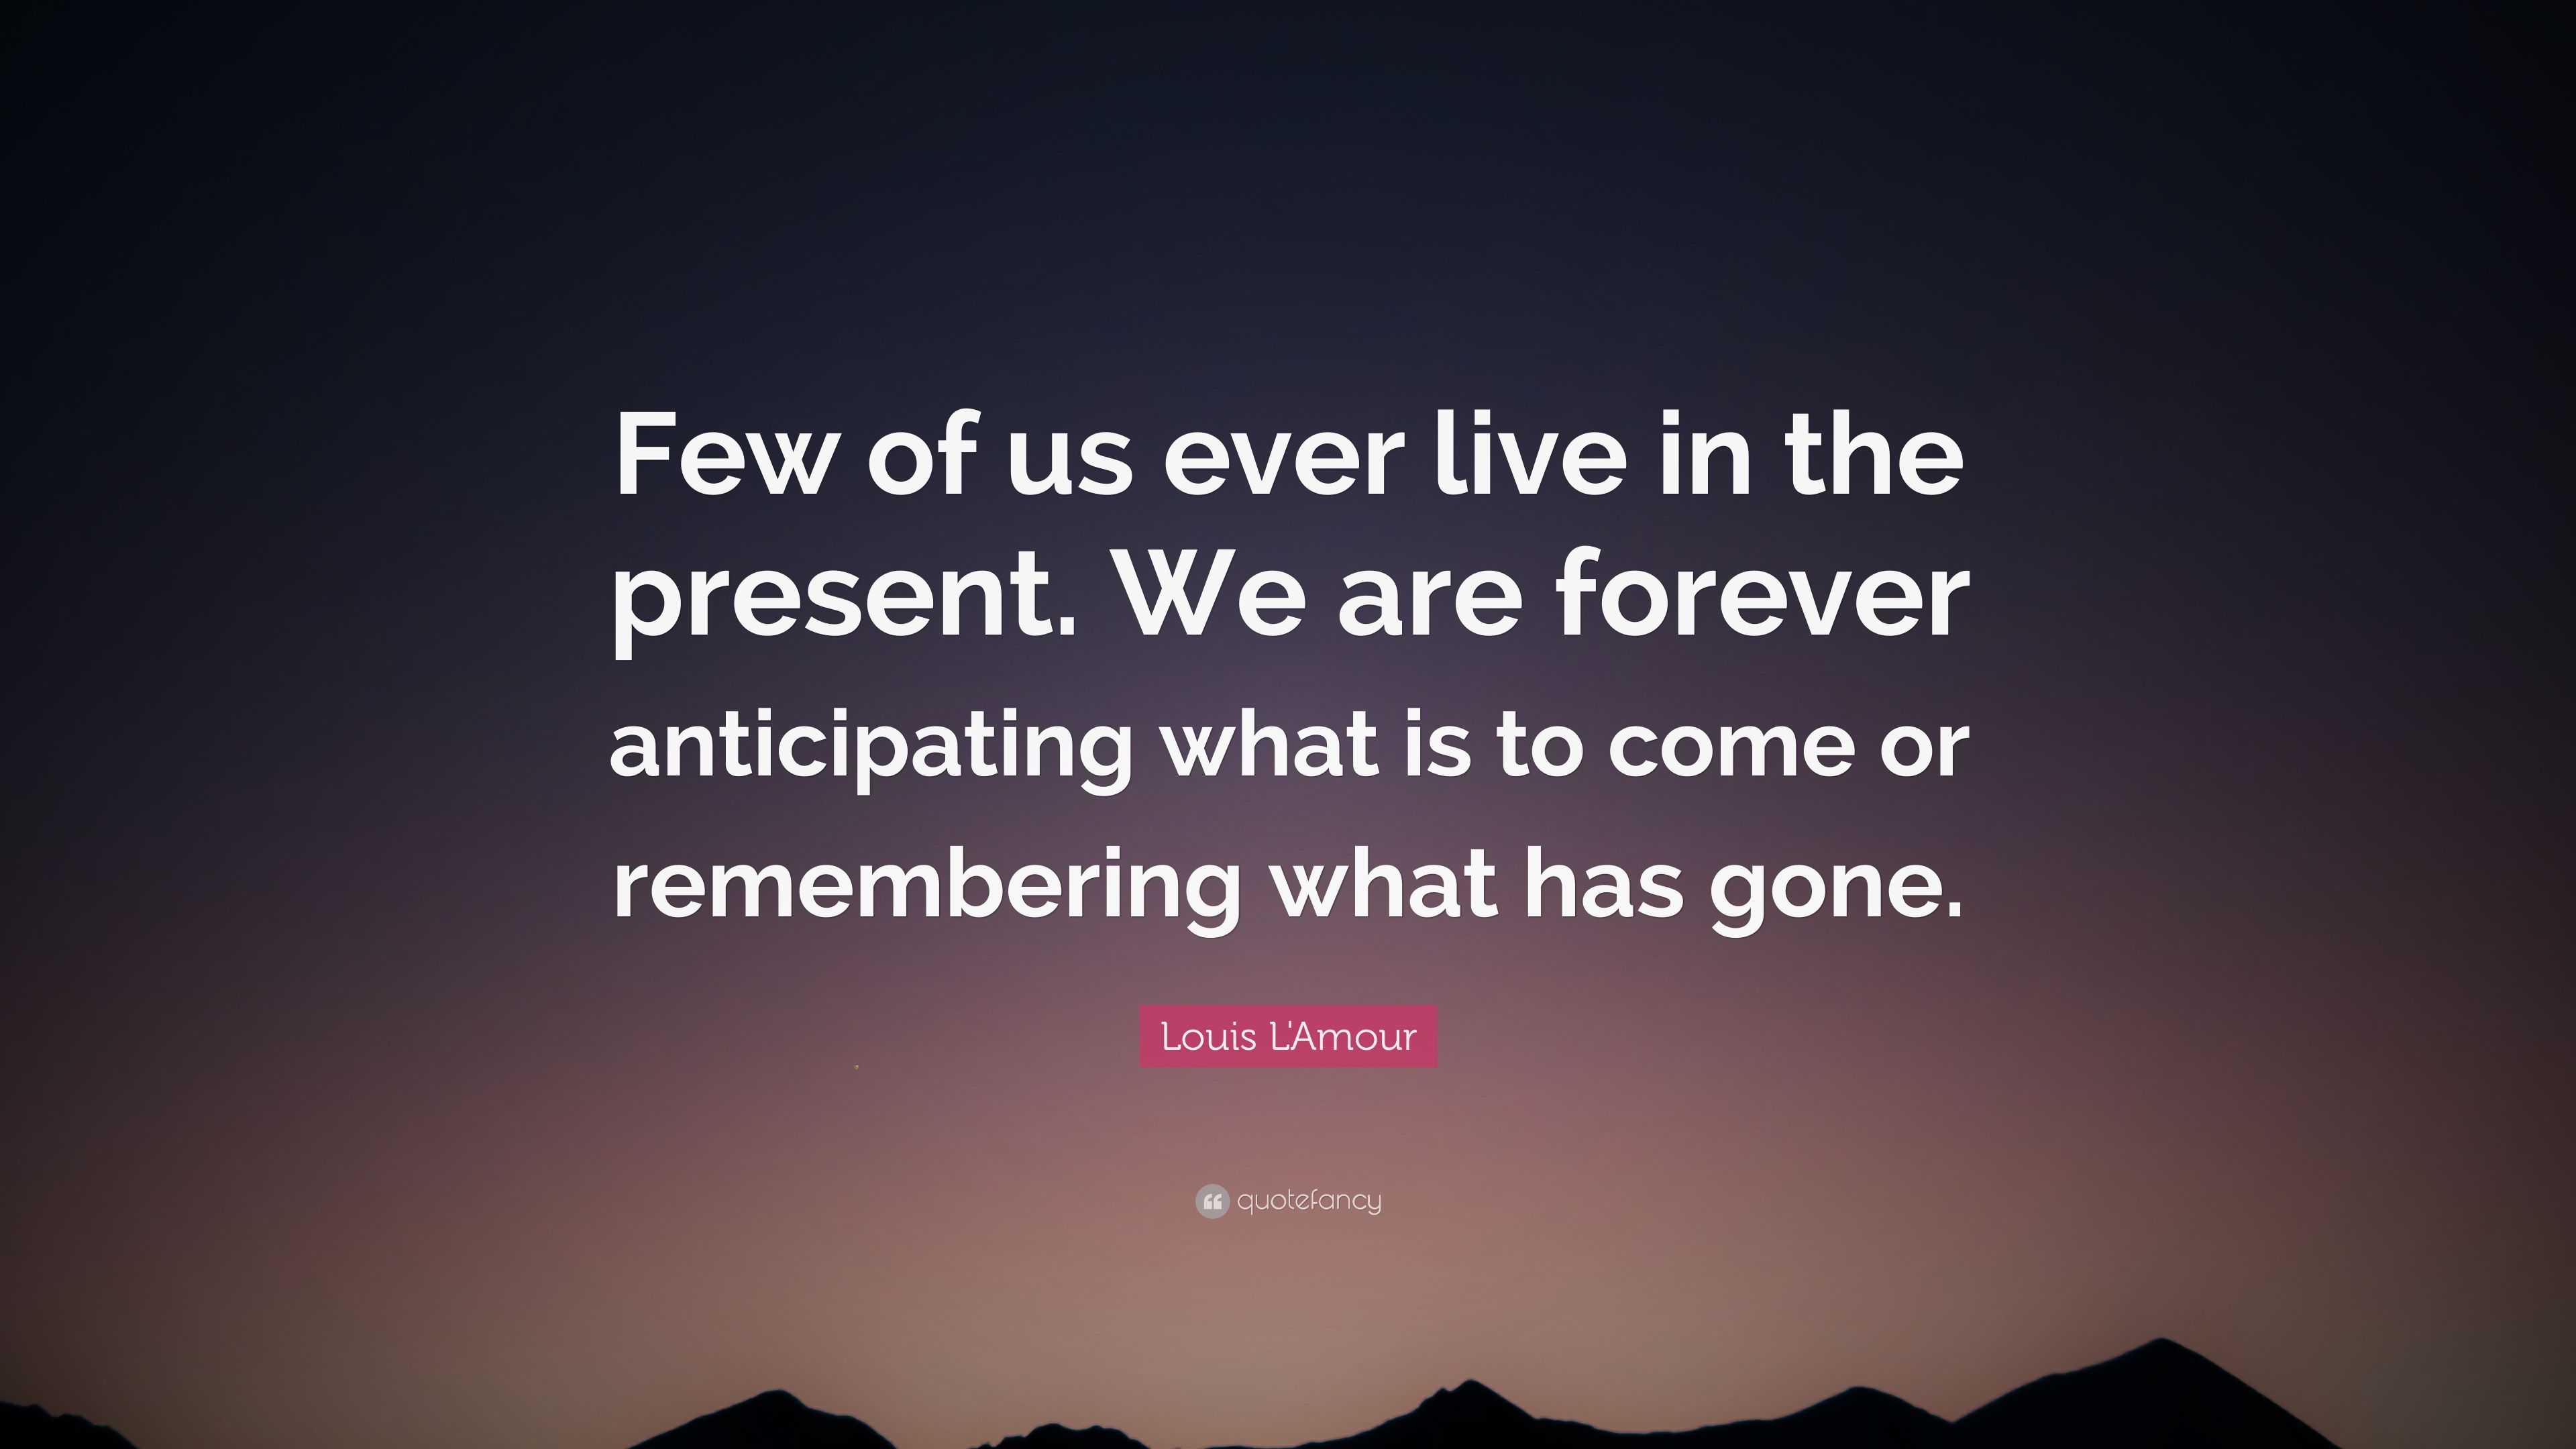 Louis L&#39;Amour Quote: “Few of us ever live in the present. We are forever anticipating what is to ...